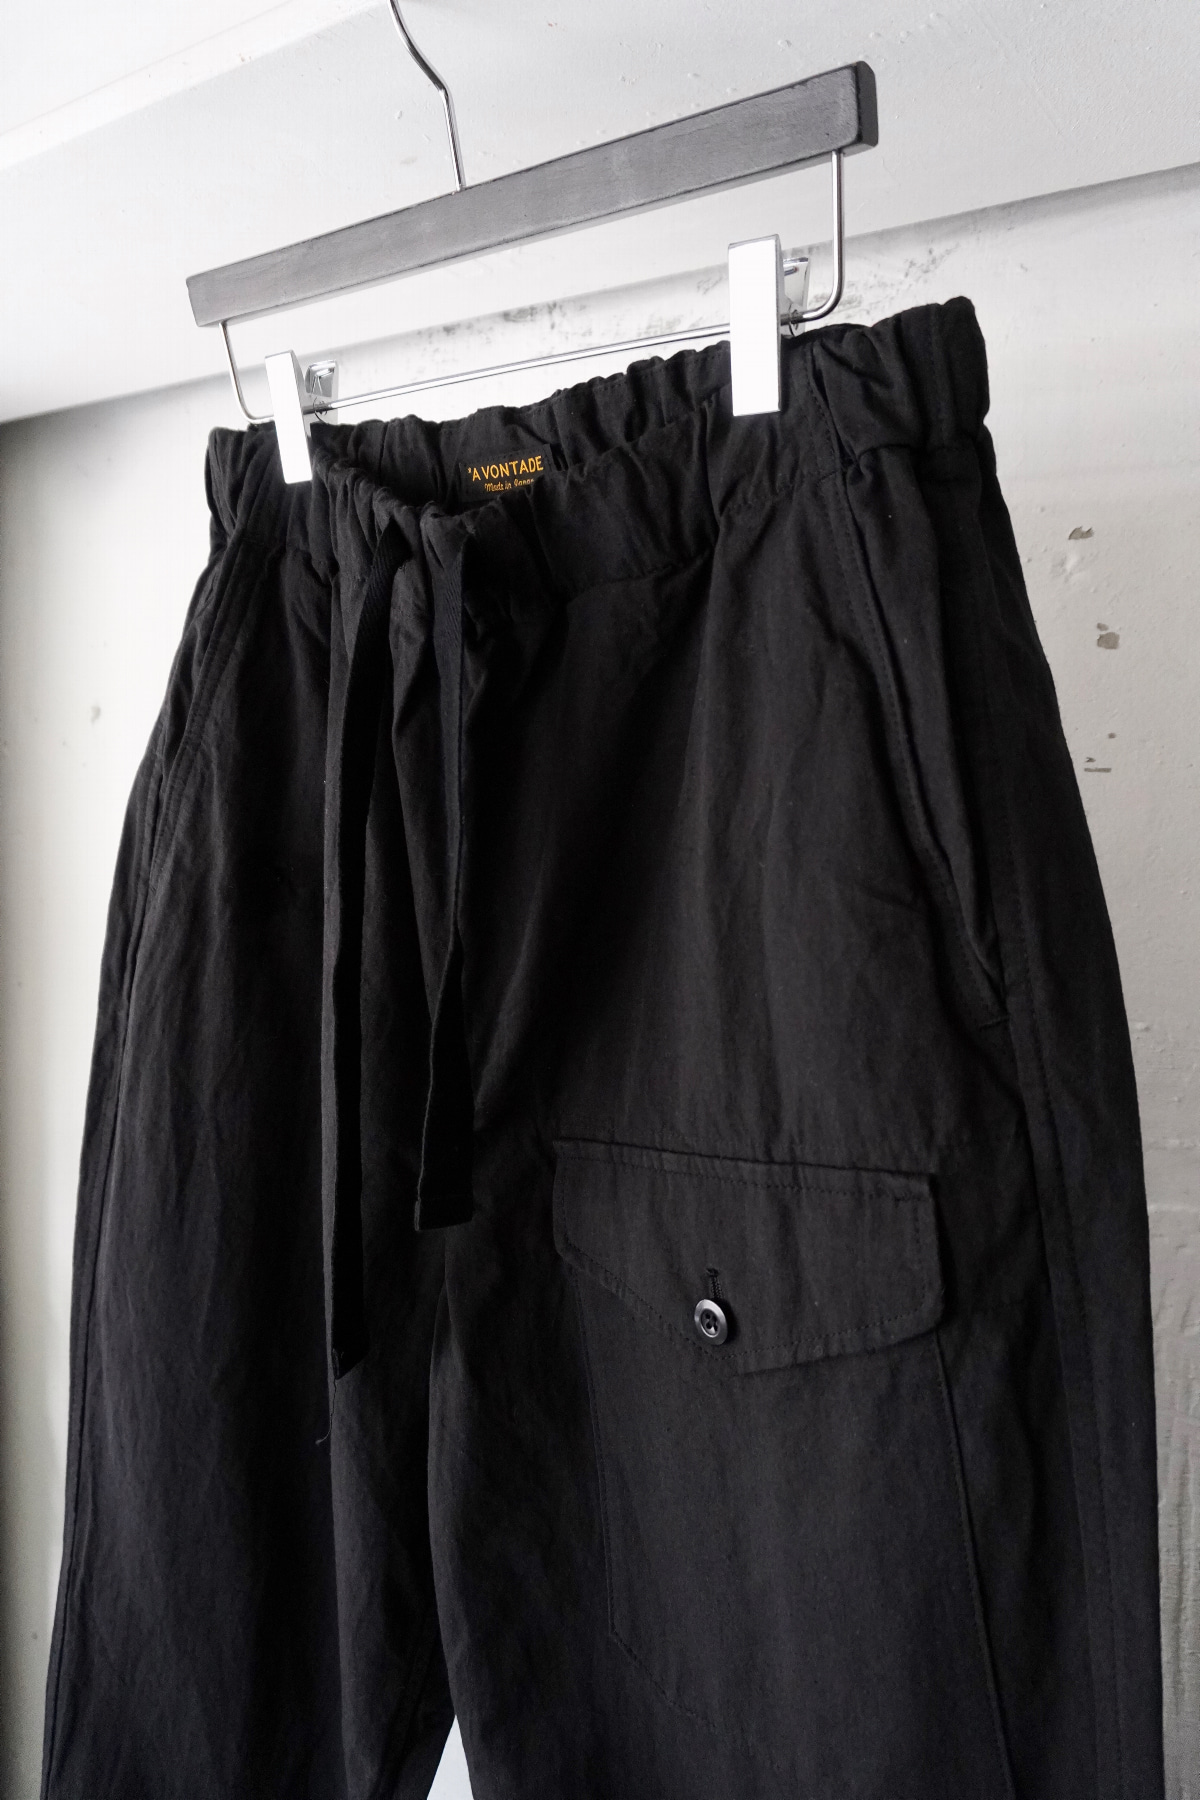 [A VONTADE] British Mil. Easy Trousers - Black